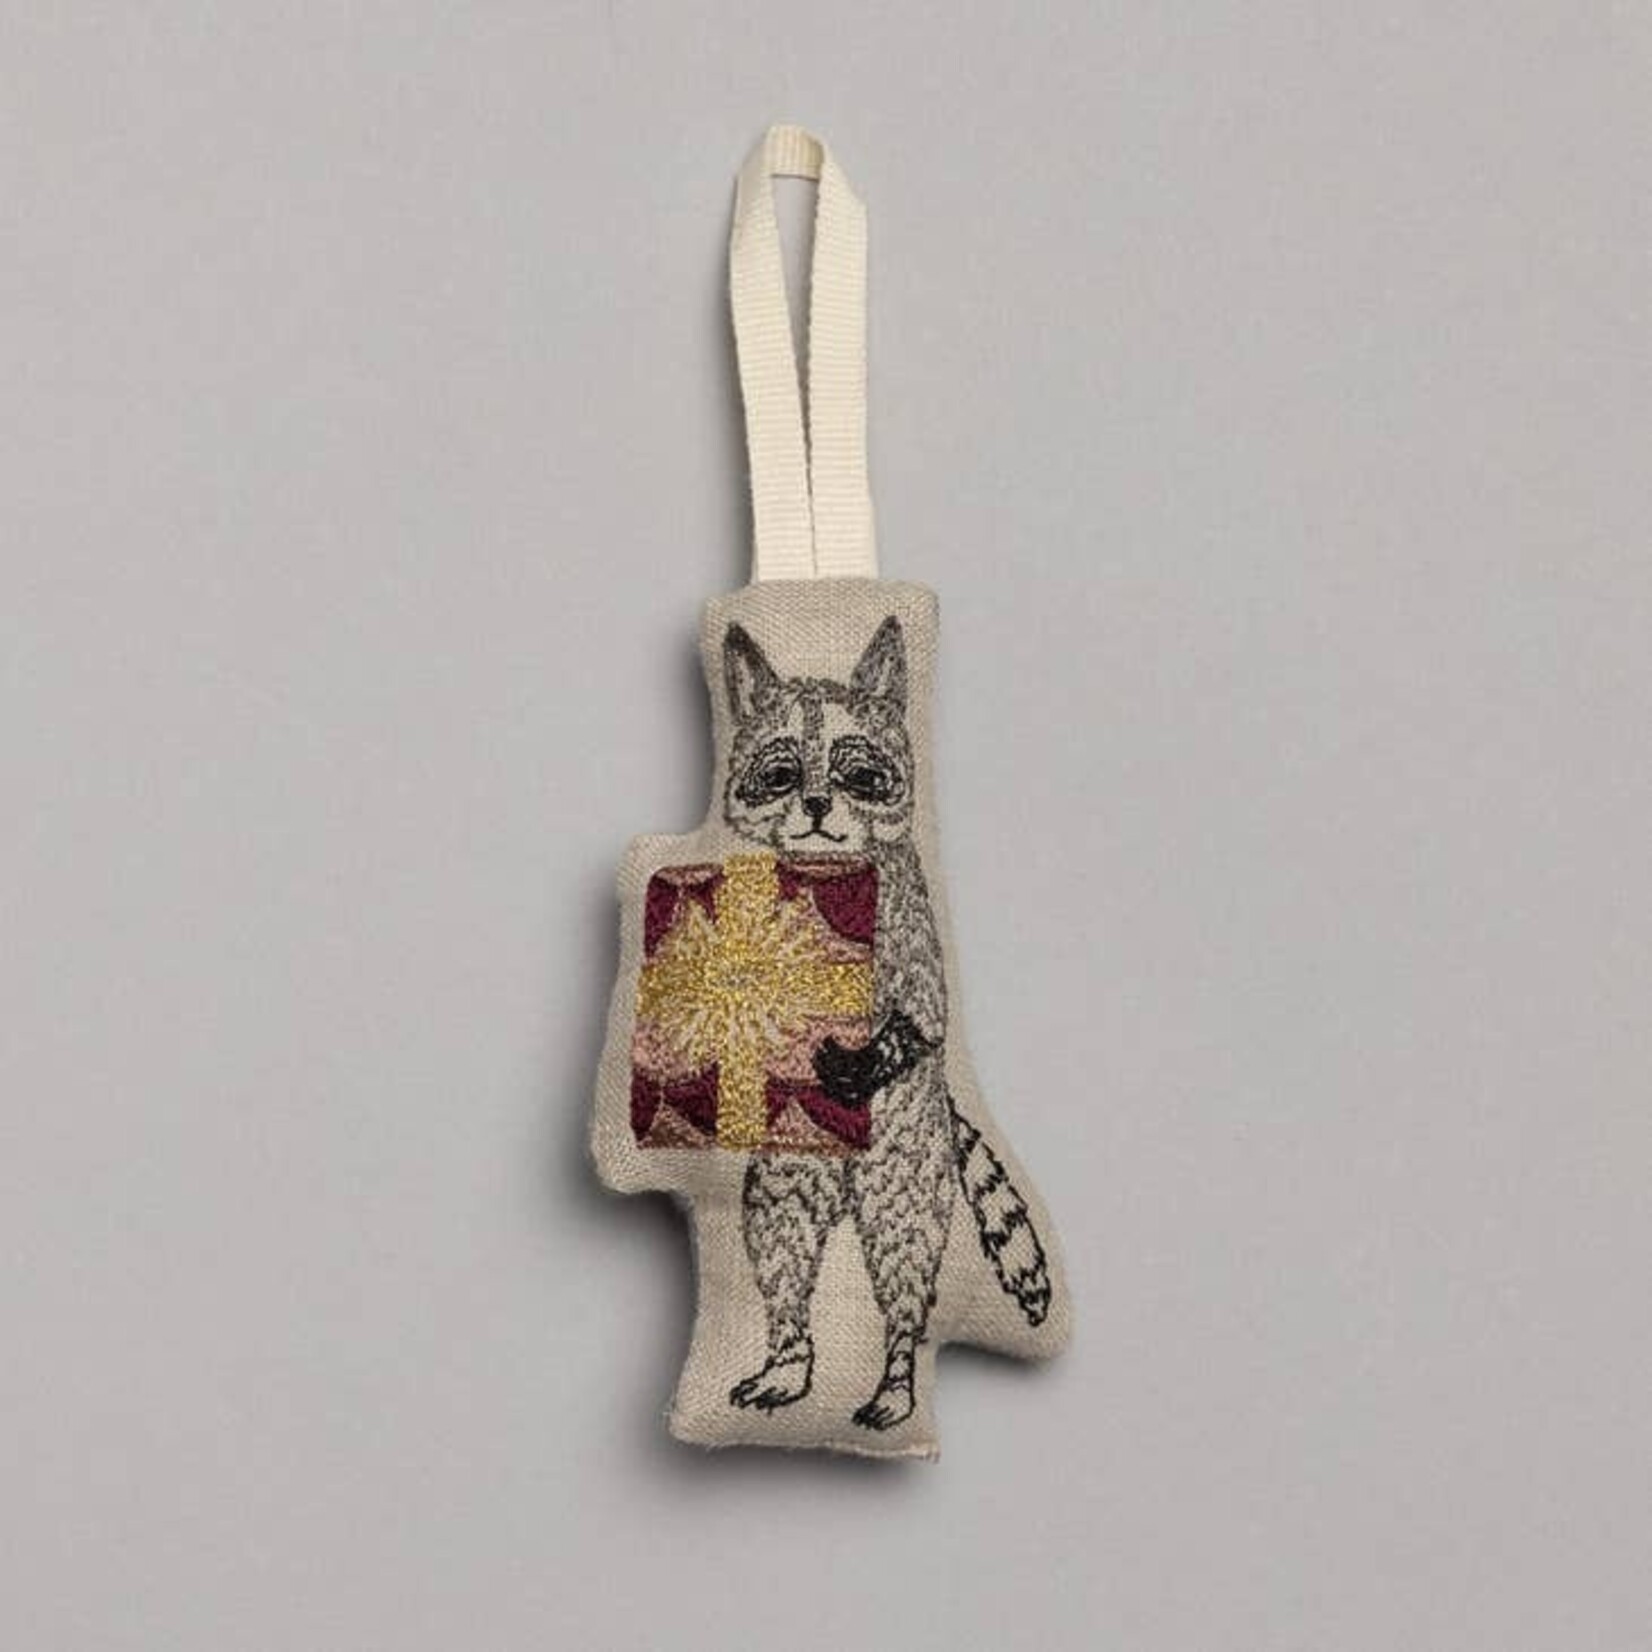 Ornaments - Embroidered Raccoon With Present Ornament